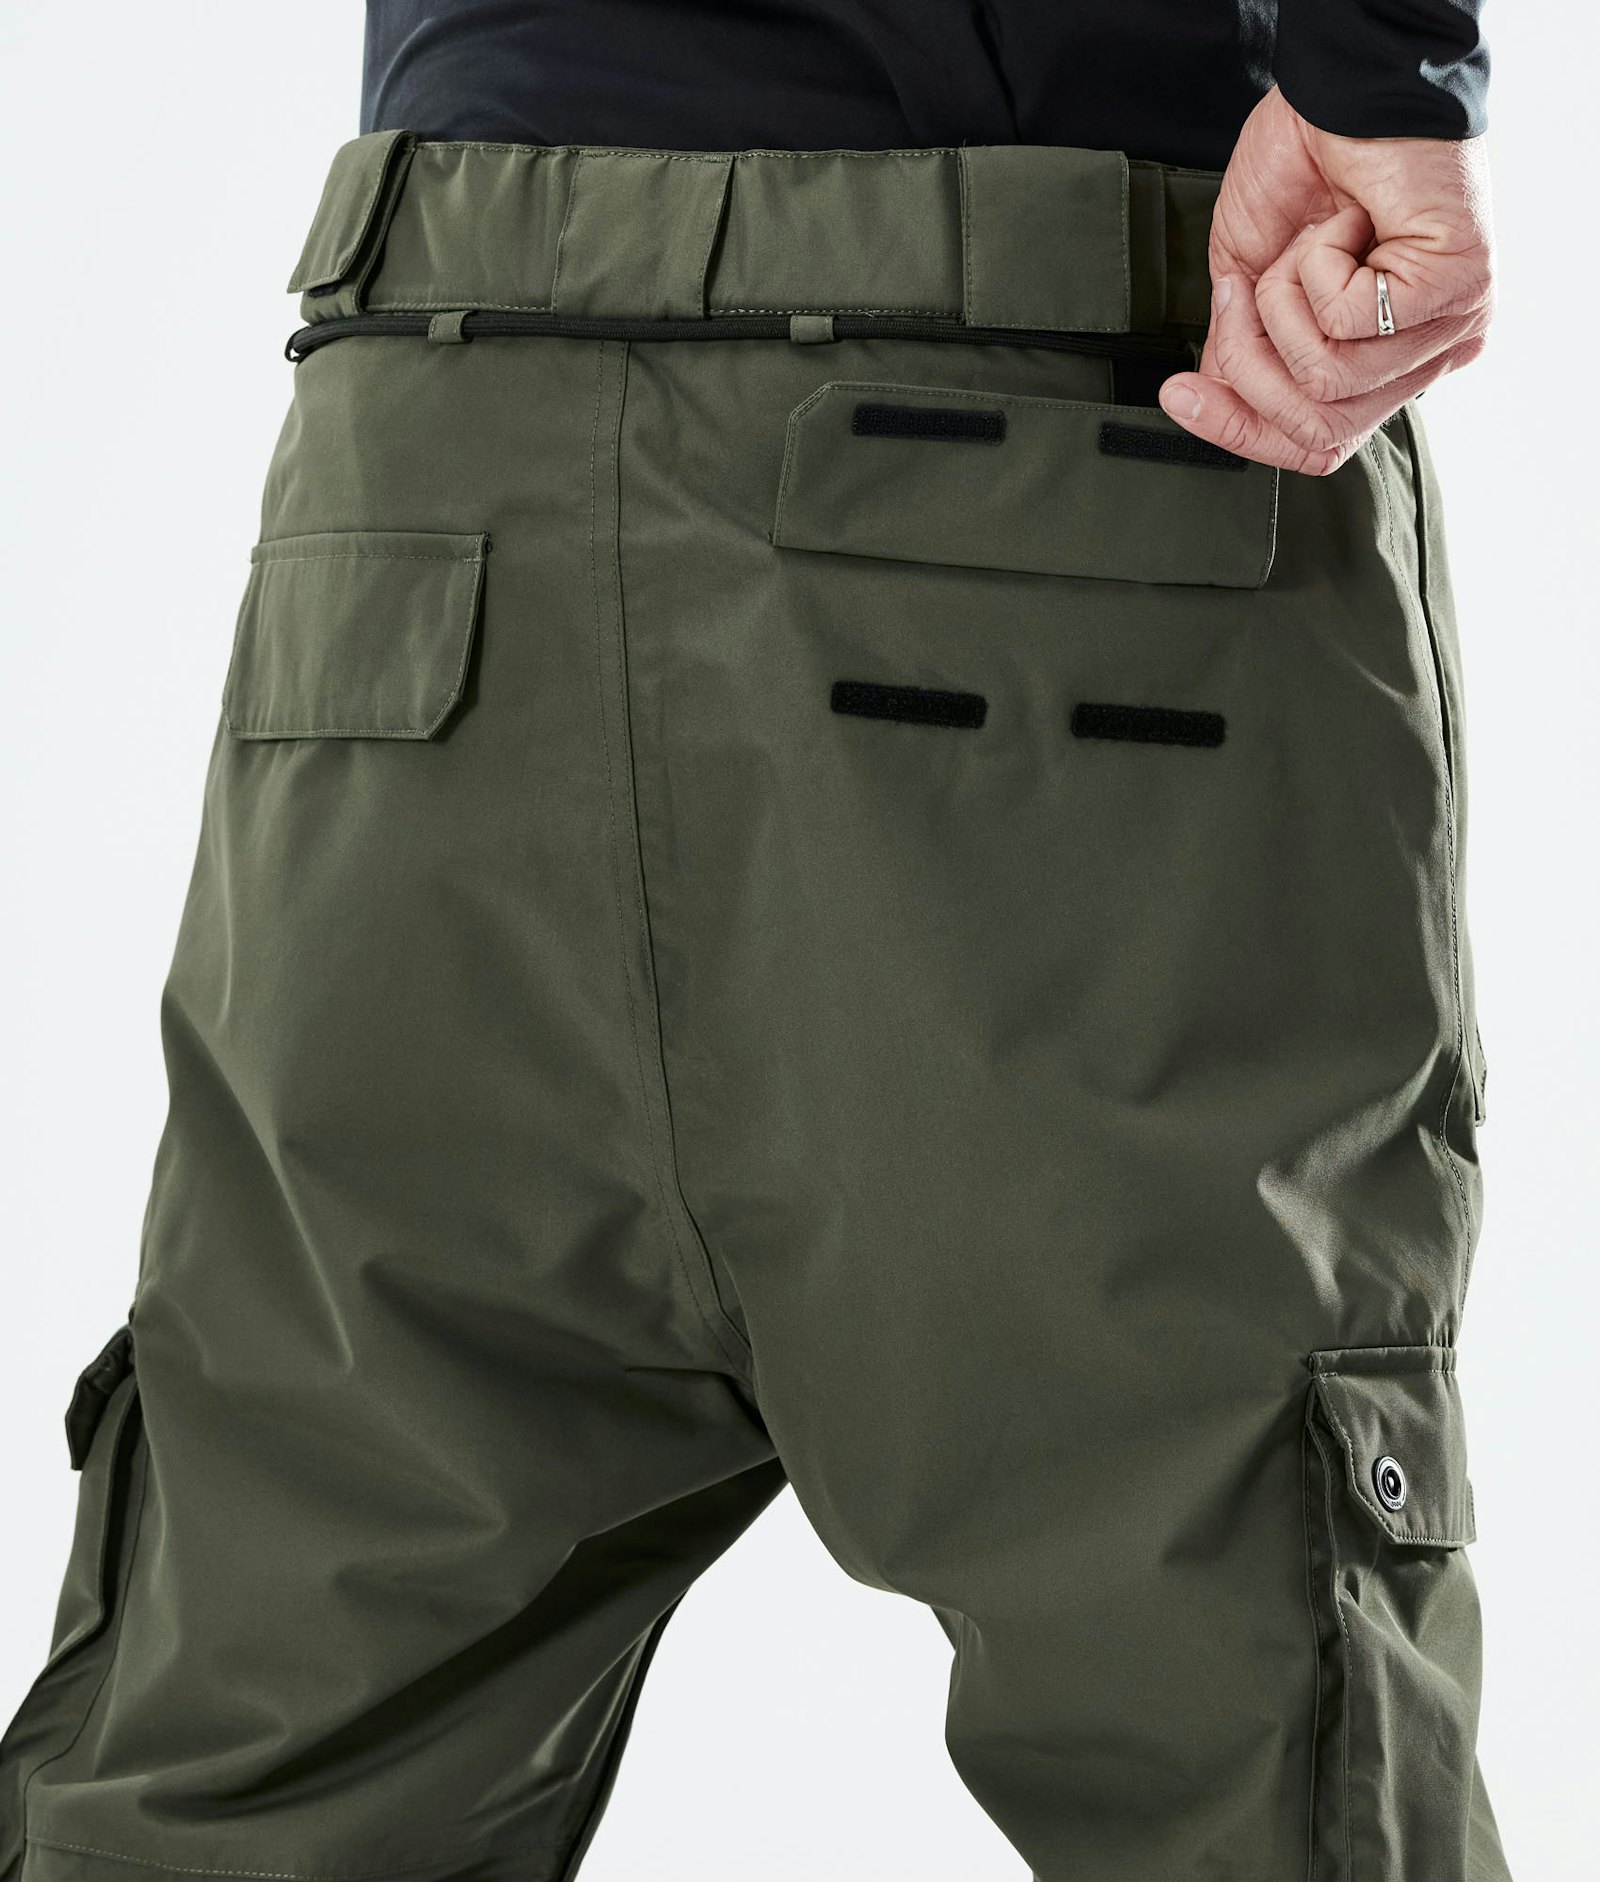 Dope Iconic 2021 Snowboard Pants Men Olive Green, Image 6 of 6